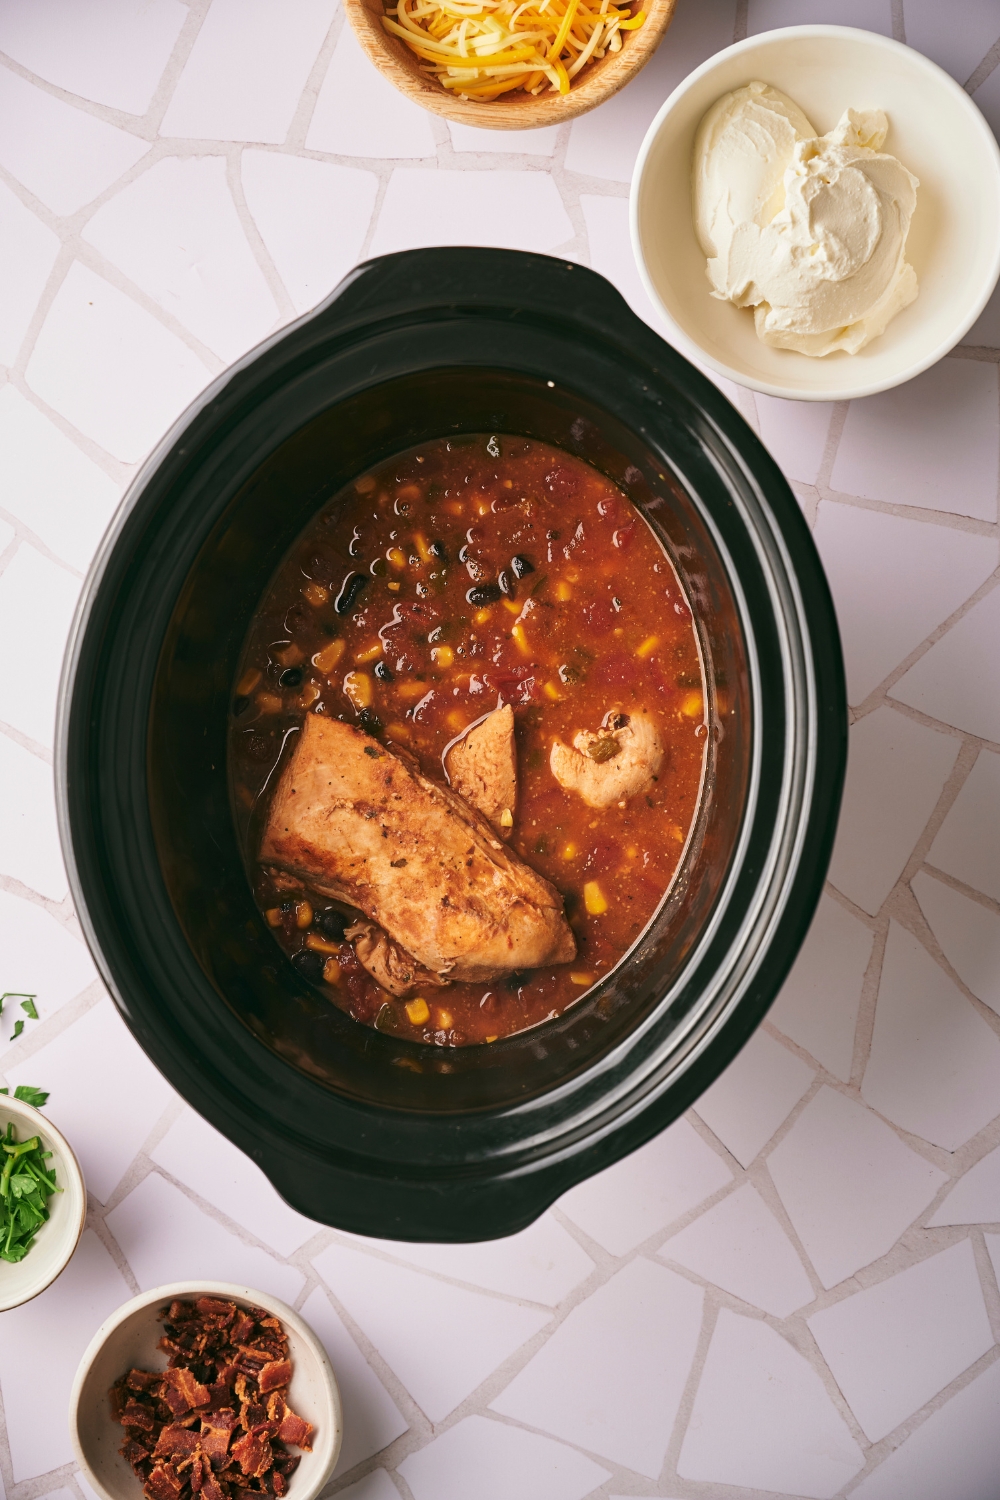 A cooked chicken breast, corn, and black beans in a broth in a slow cooker. Behind it is a bowl of cream cheese.